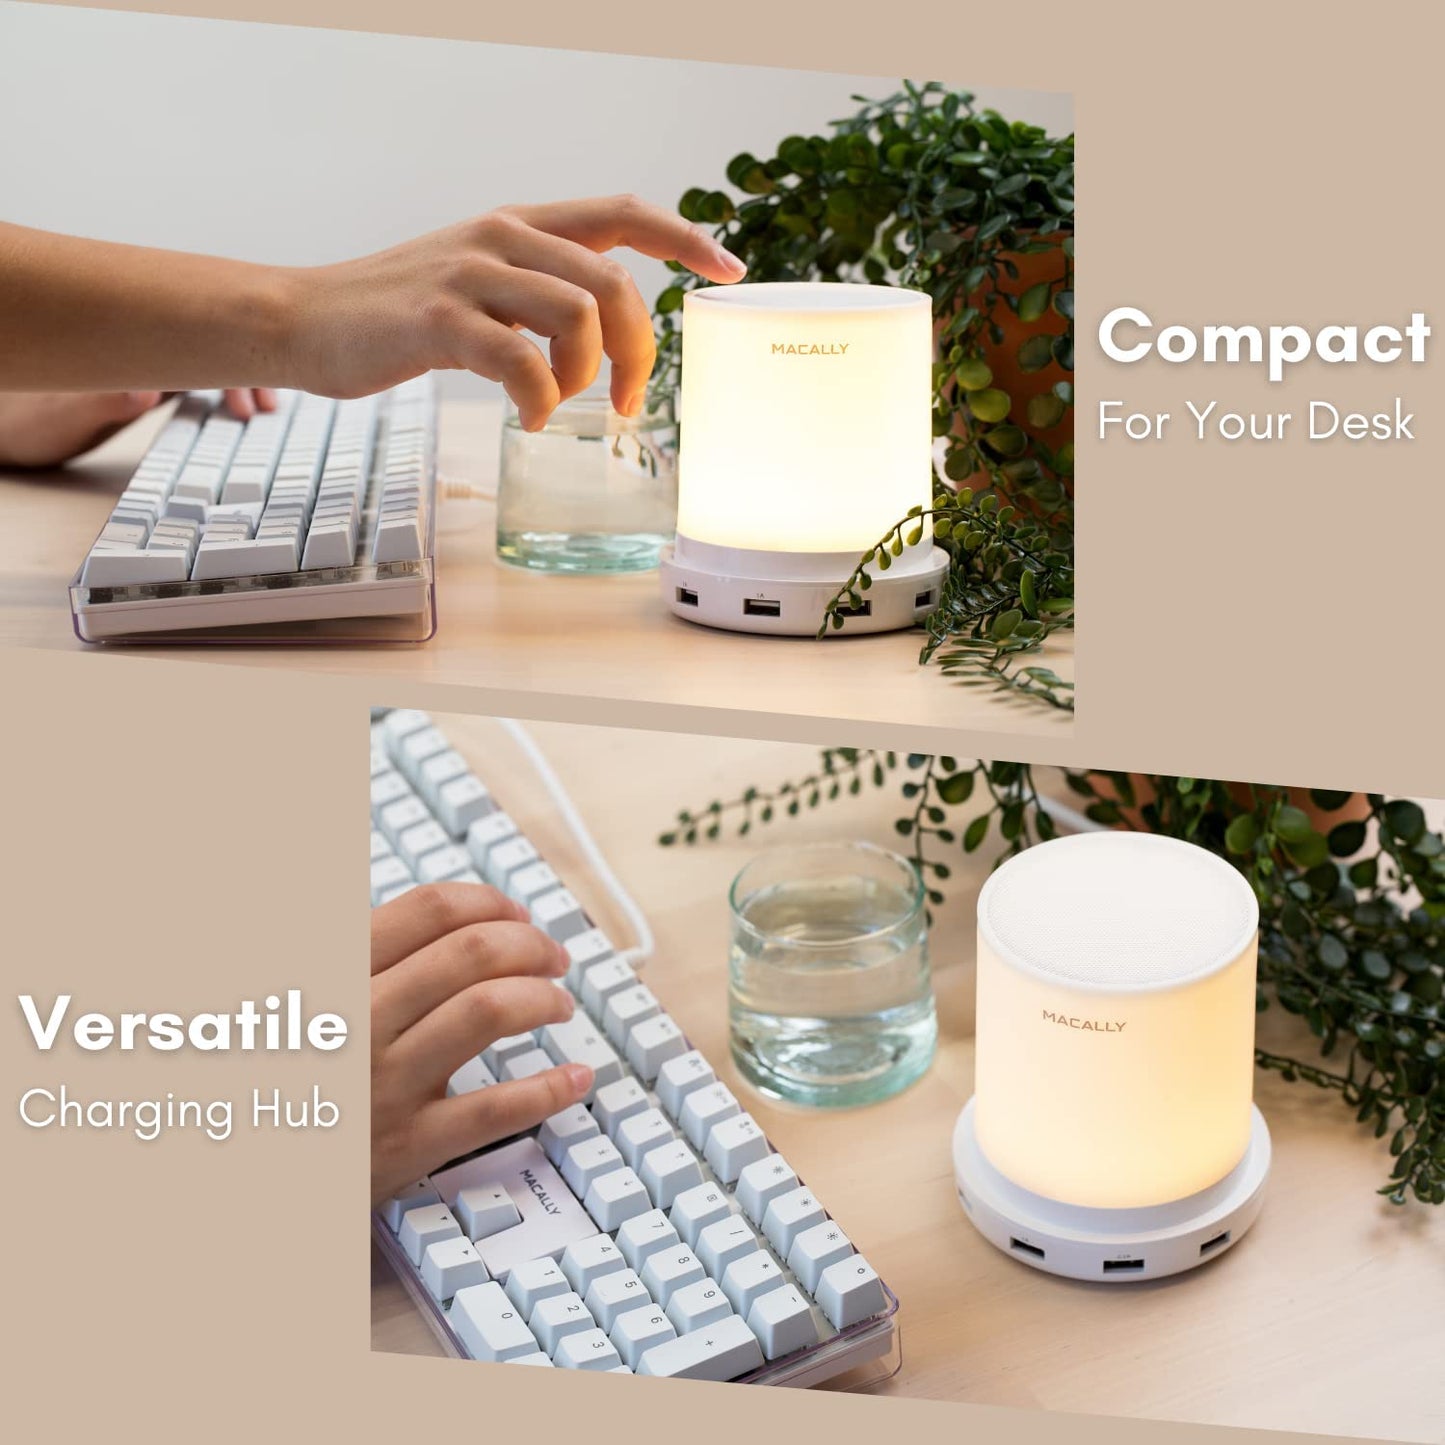 Table Bedside Lamp with USB Ports - 4 Fast Charging Ports and Touch Control - USB Lamp with Dimmable Light - Perfect as Small Bedside Lamp for Nightstand or Bedside Night Light Charger USB